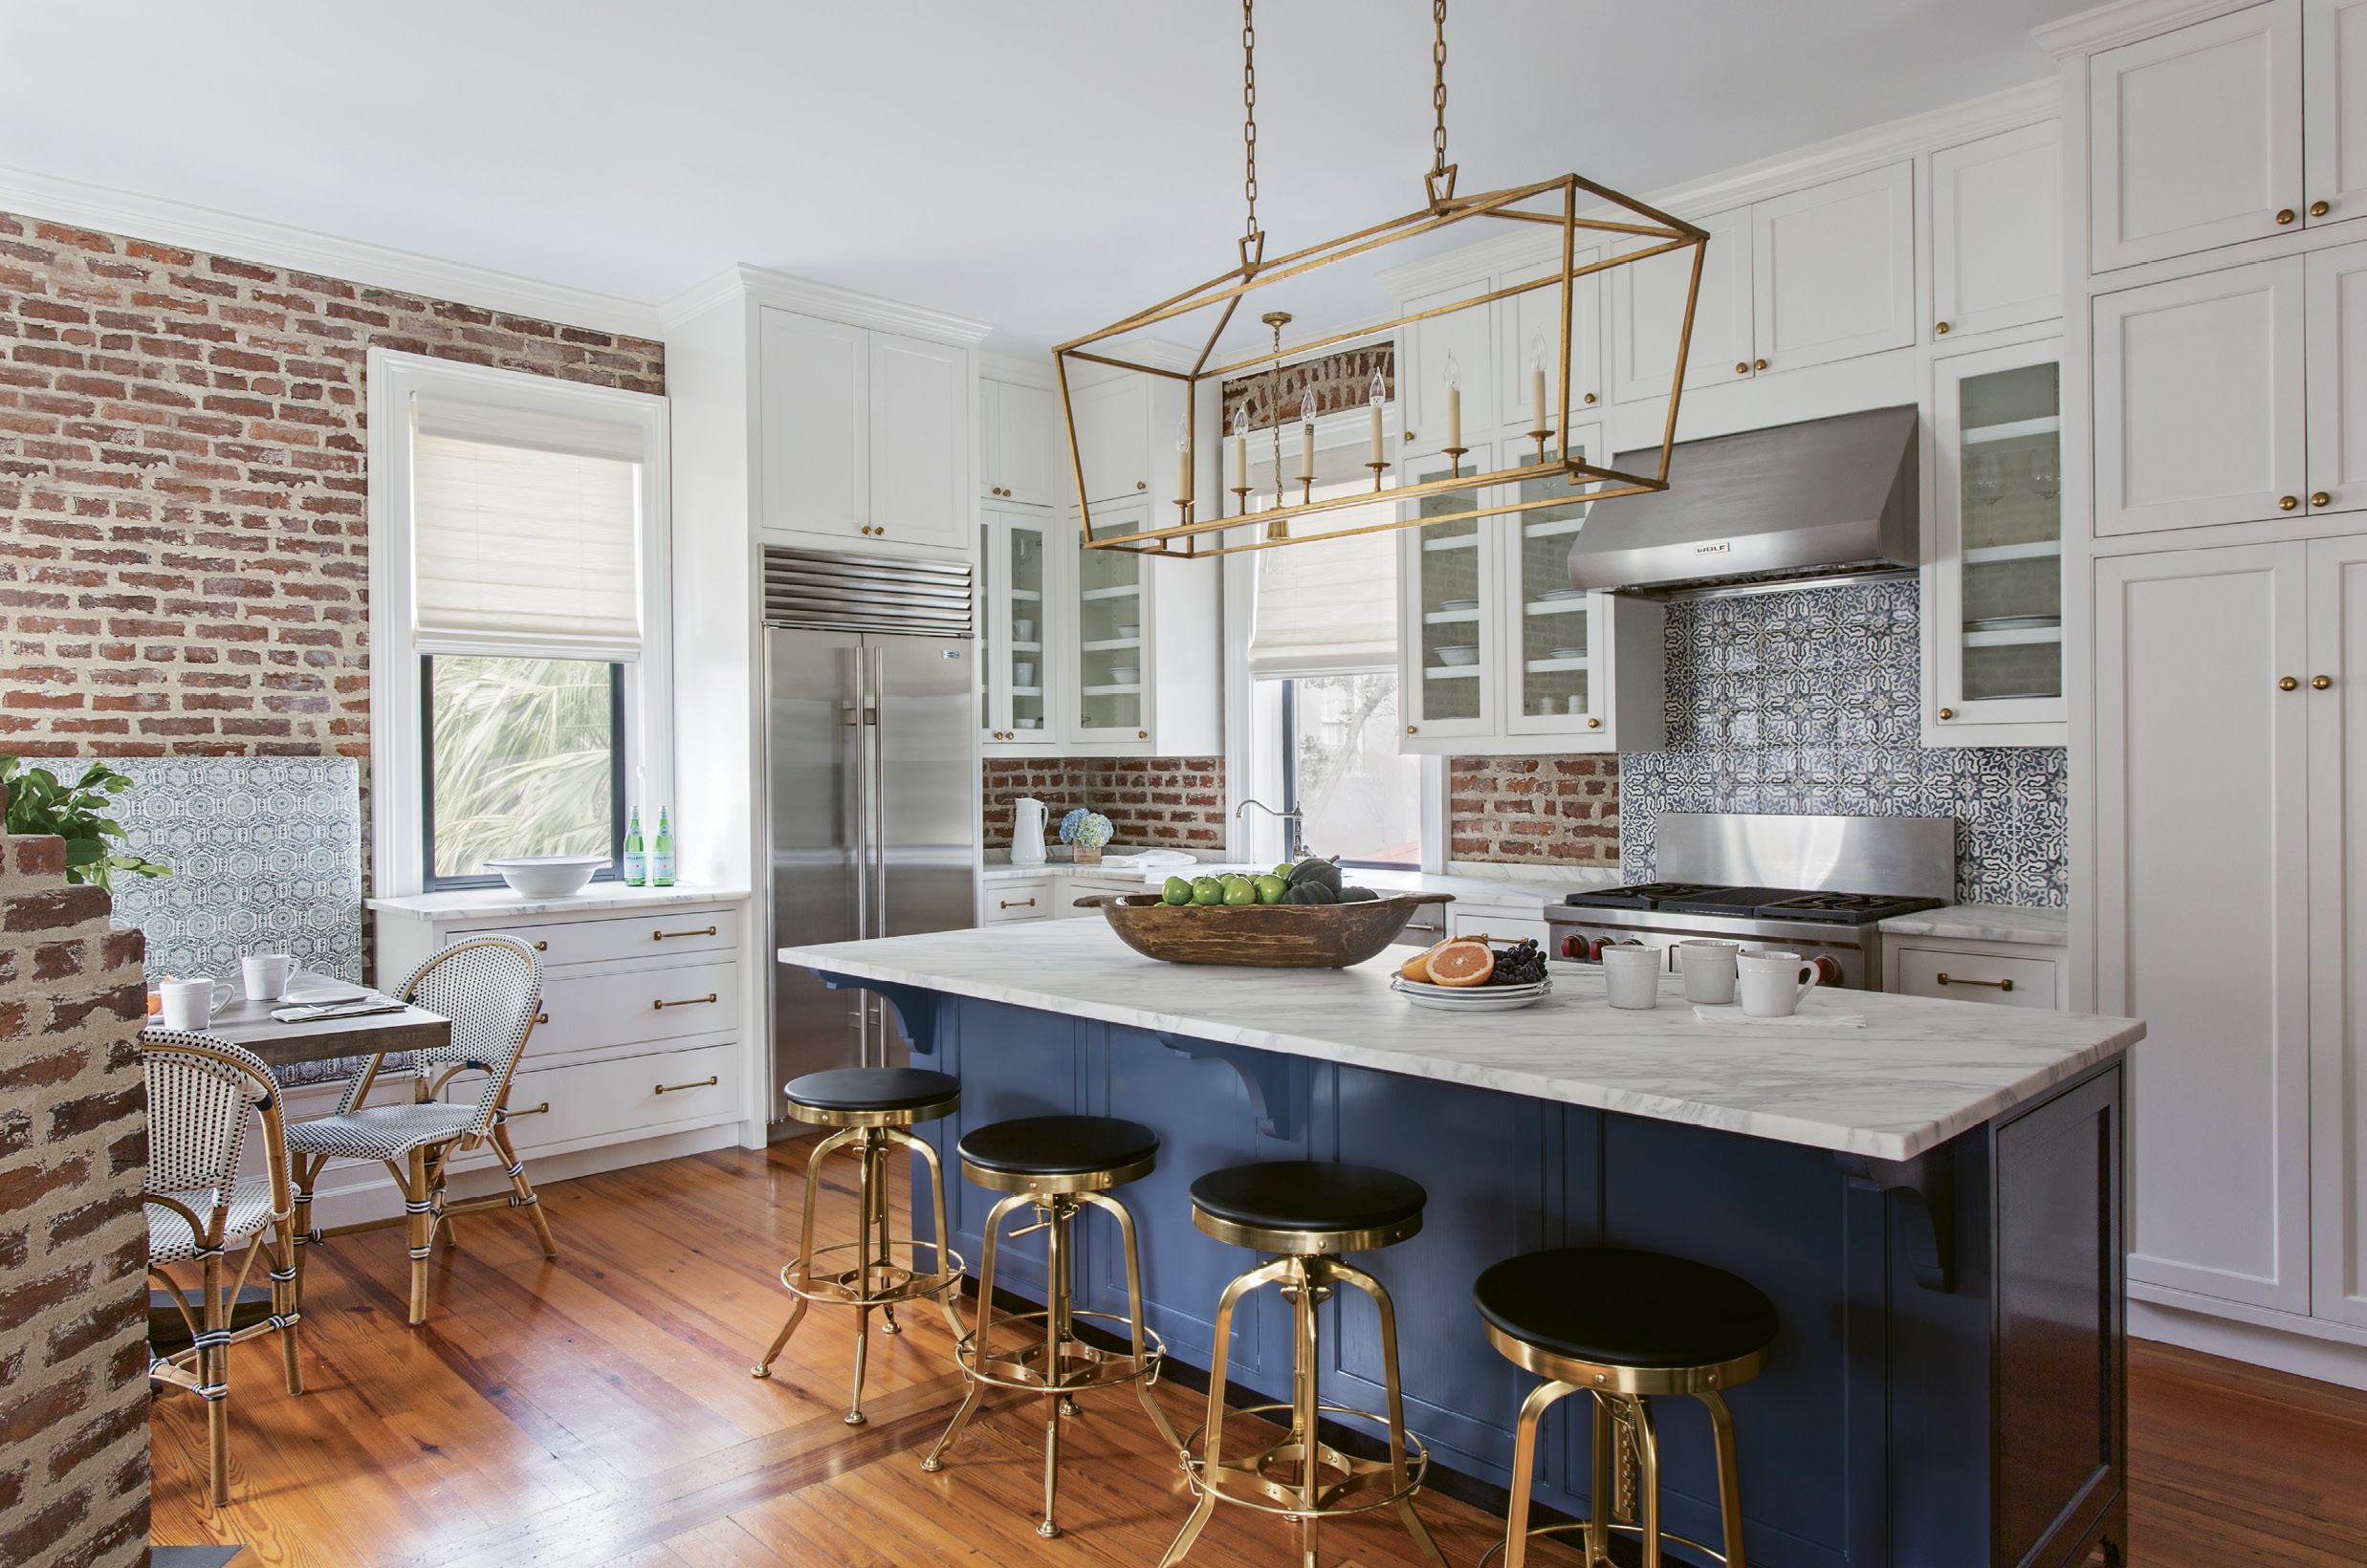 In the second-floor kitchen, Peake played off the navy blue of the island with complementary patterns in the tile backsplash and the washed linen fabric for the banquette.